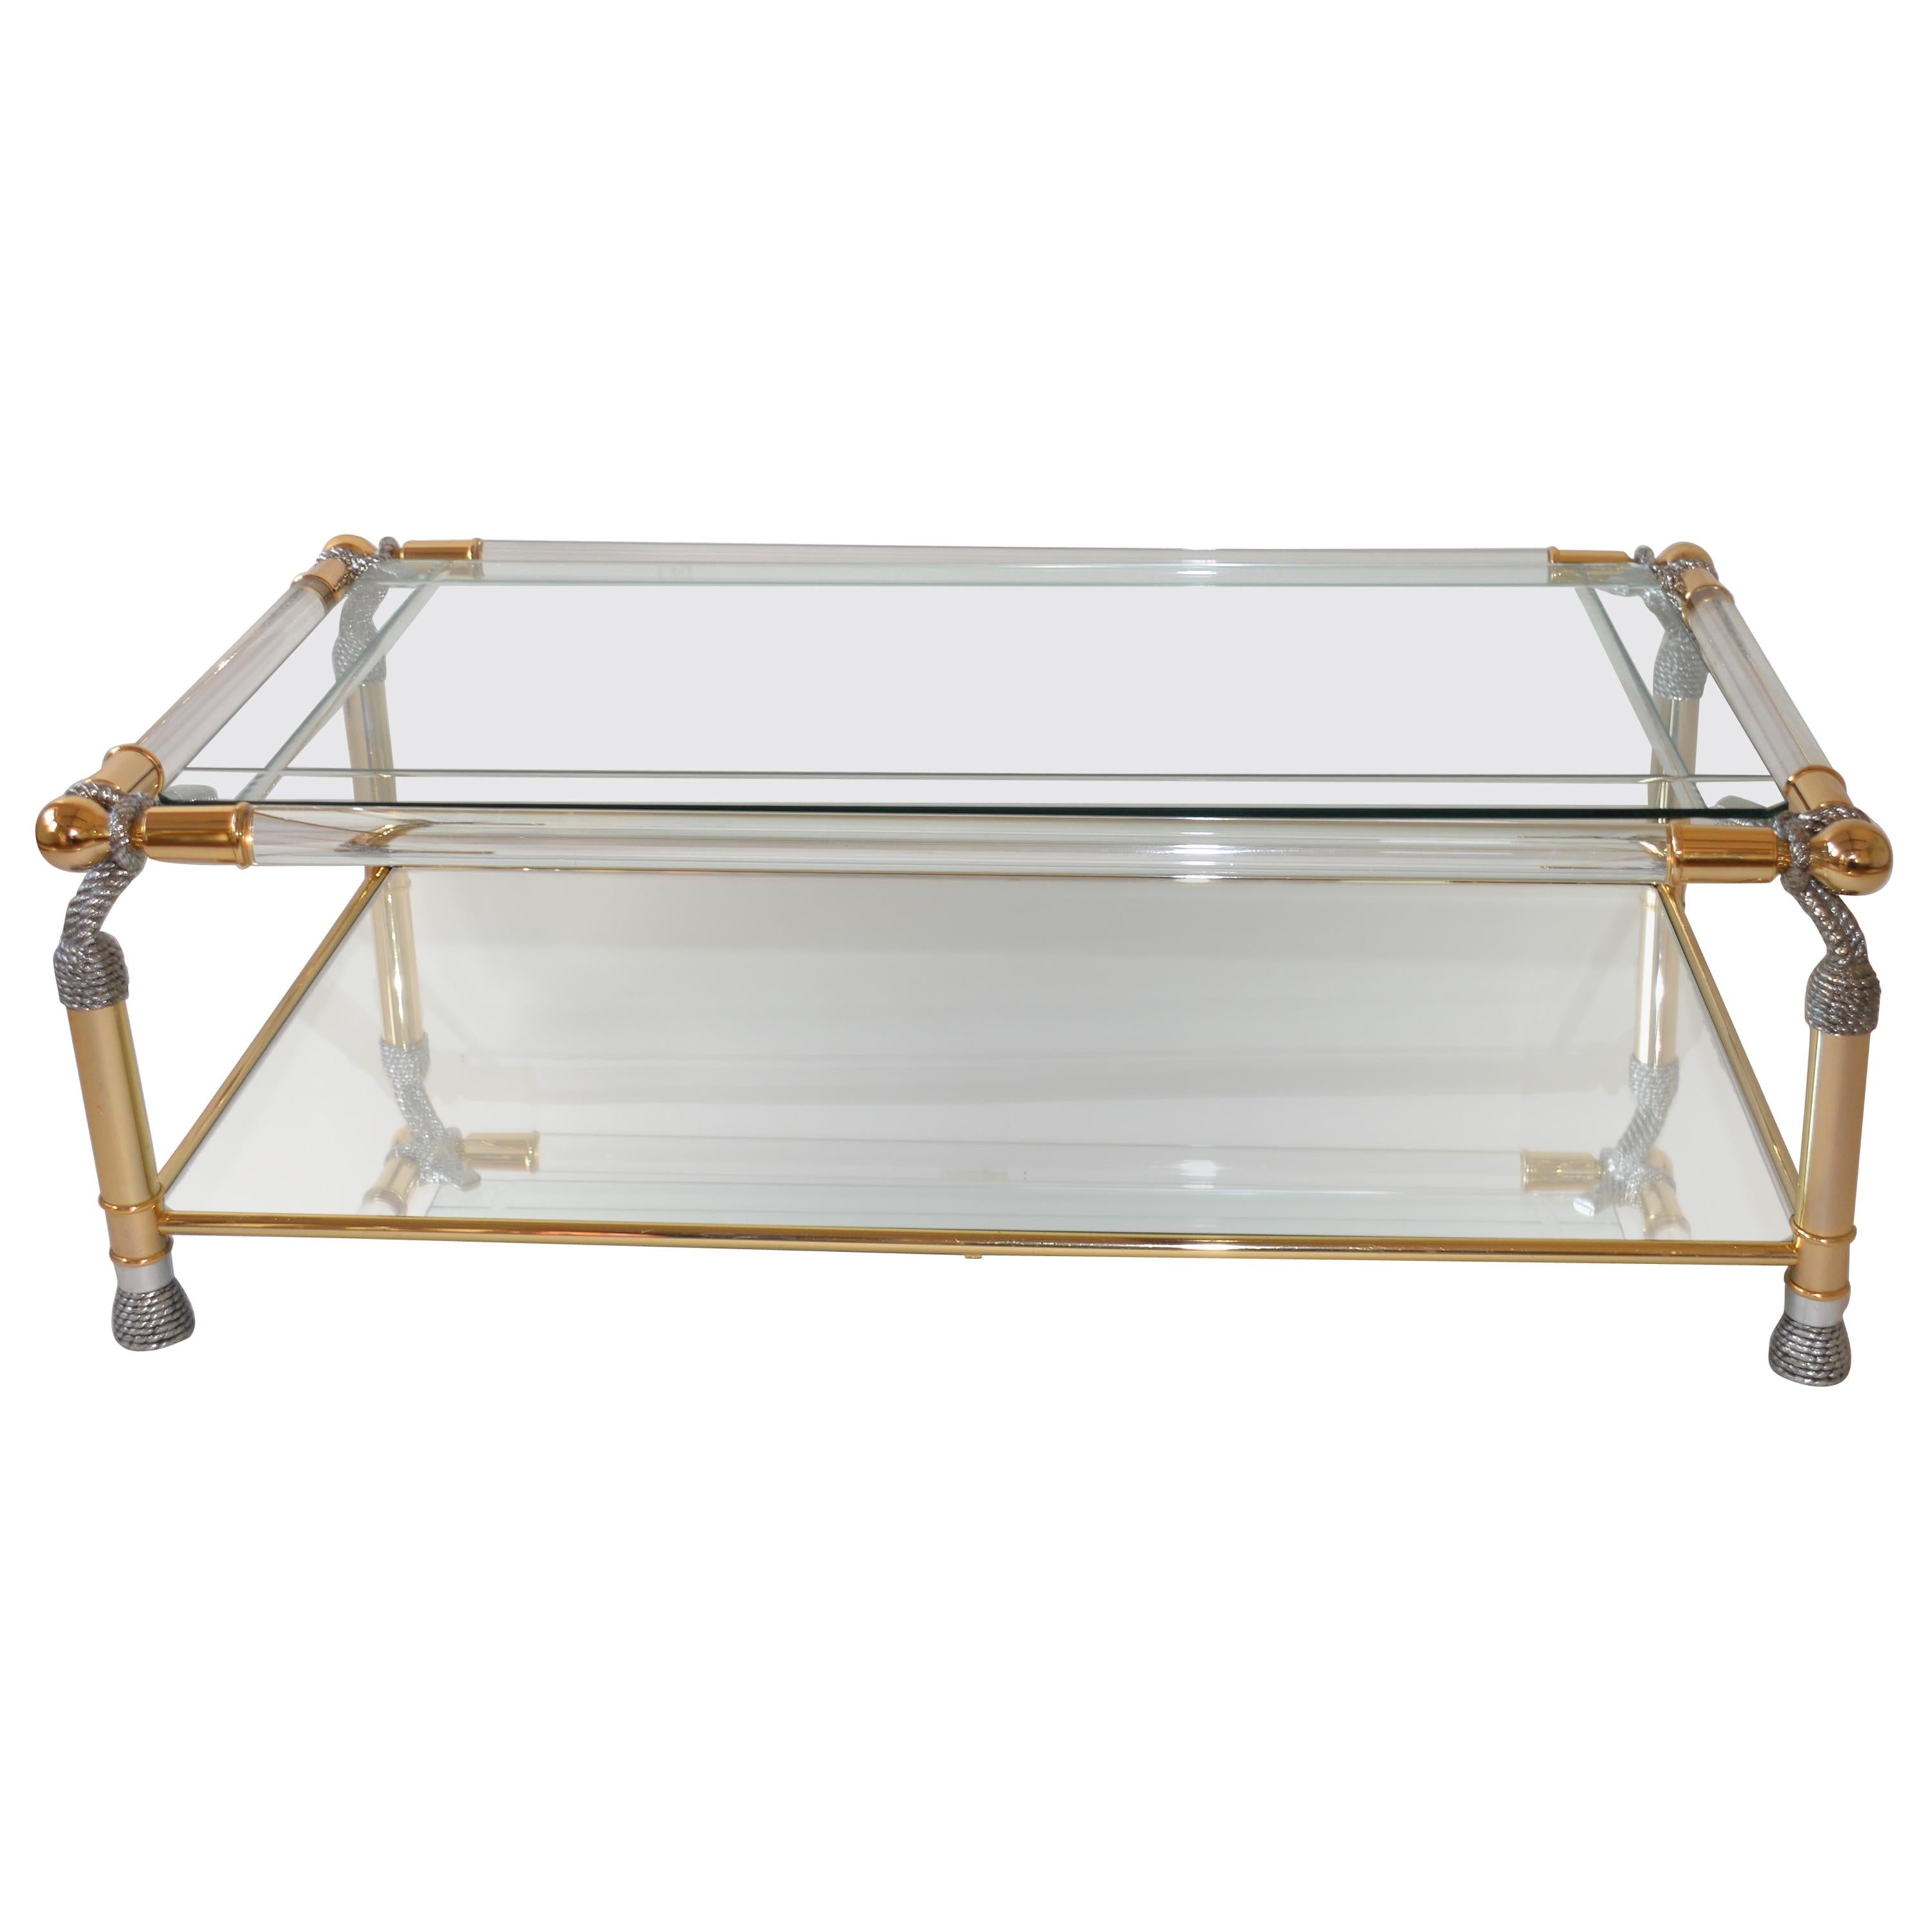 Striking Lucite Hollywood Regency Style Coffee Table